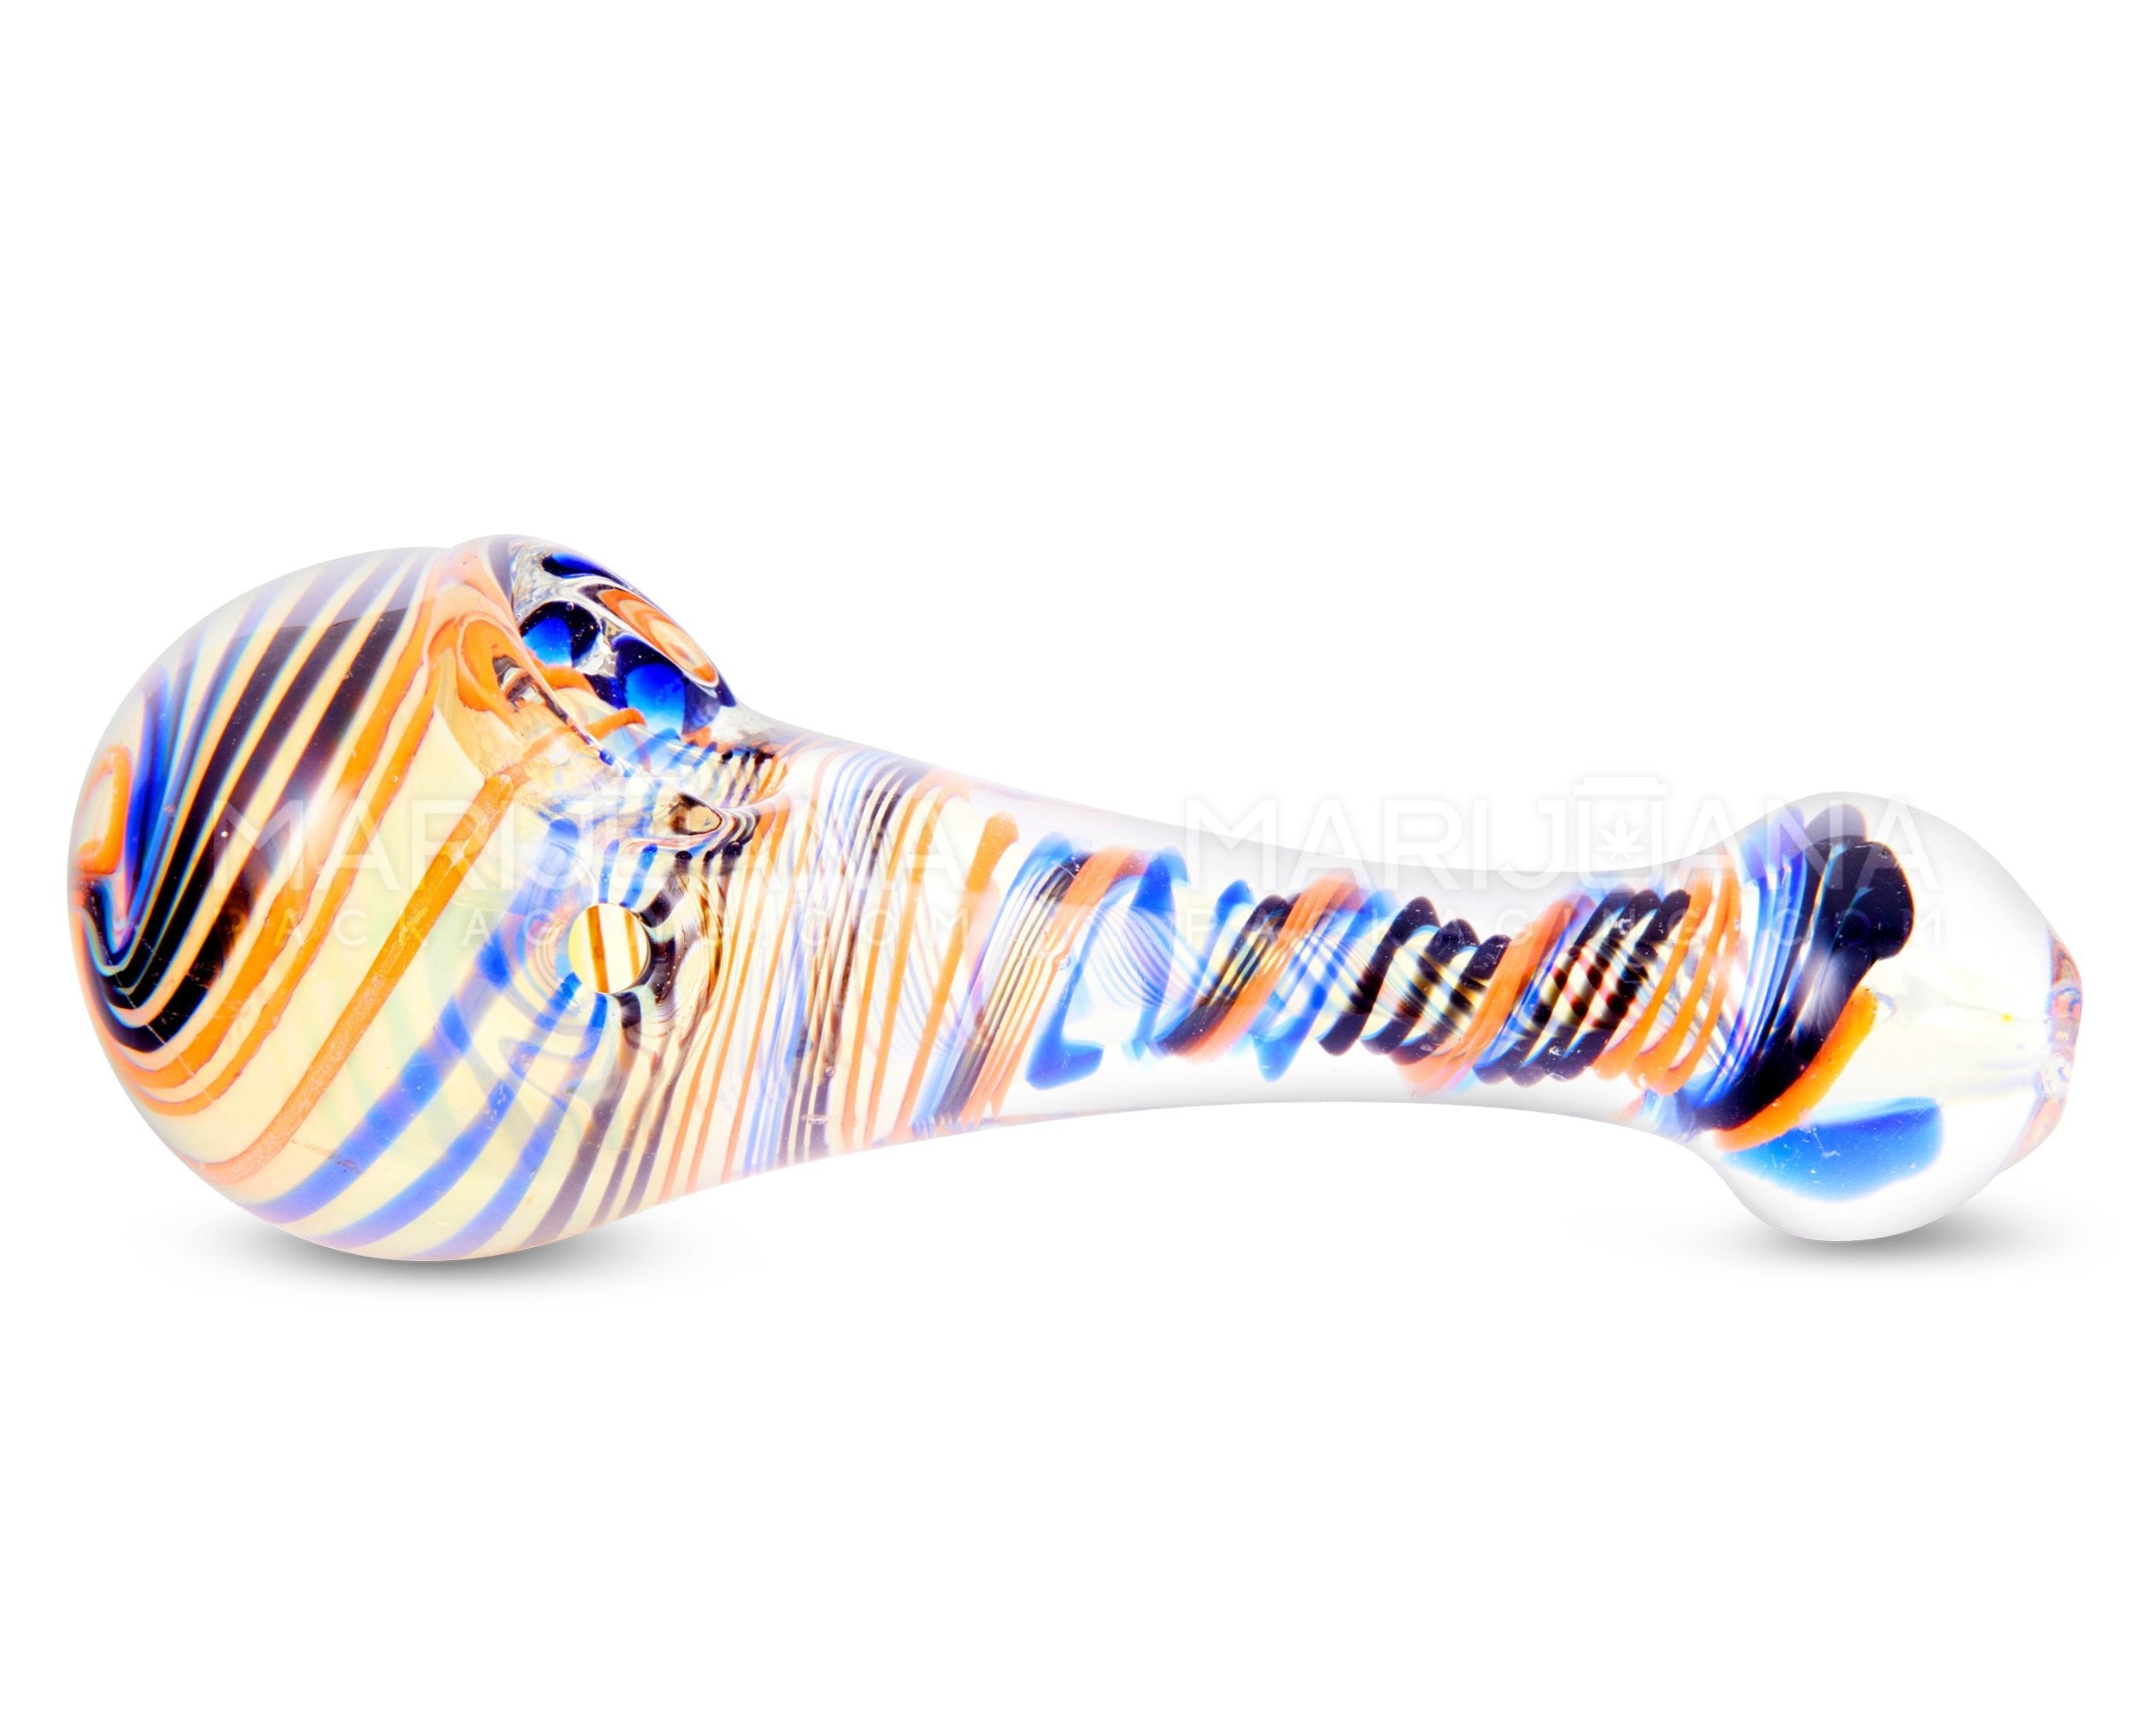 Spiral & Fumed Spoon Hand Pipe w/ Triple Knockers | 4.5in Long - Glass - Assorted - 5